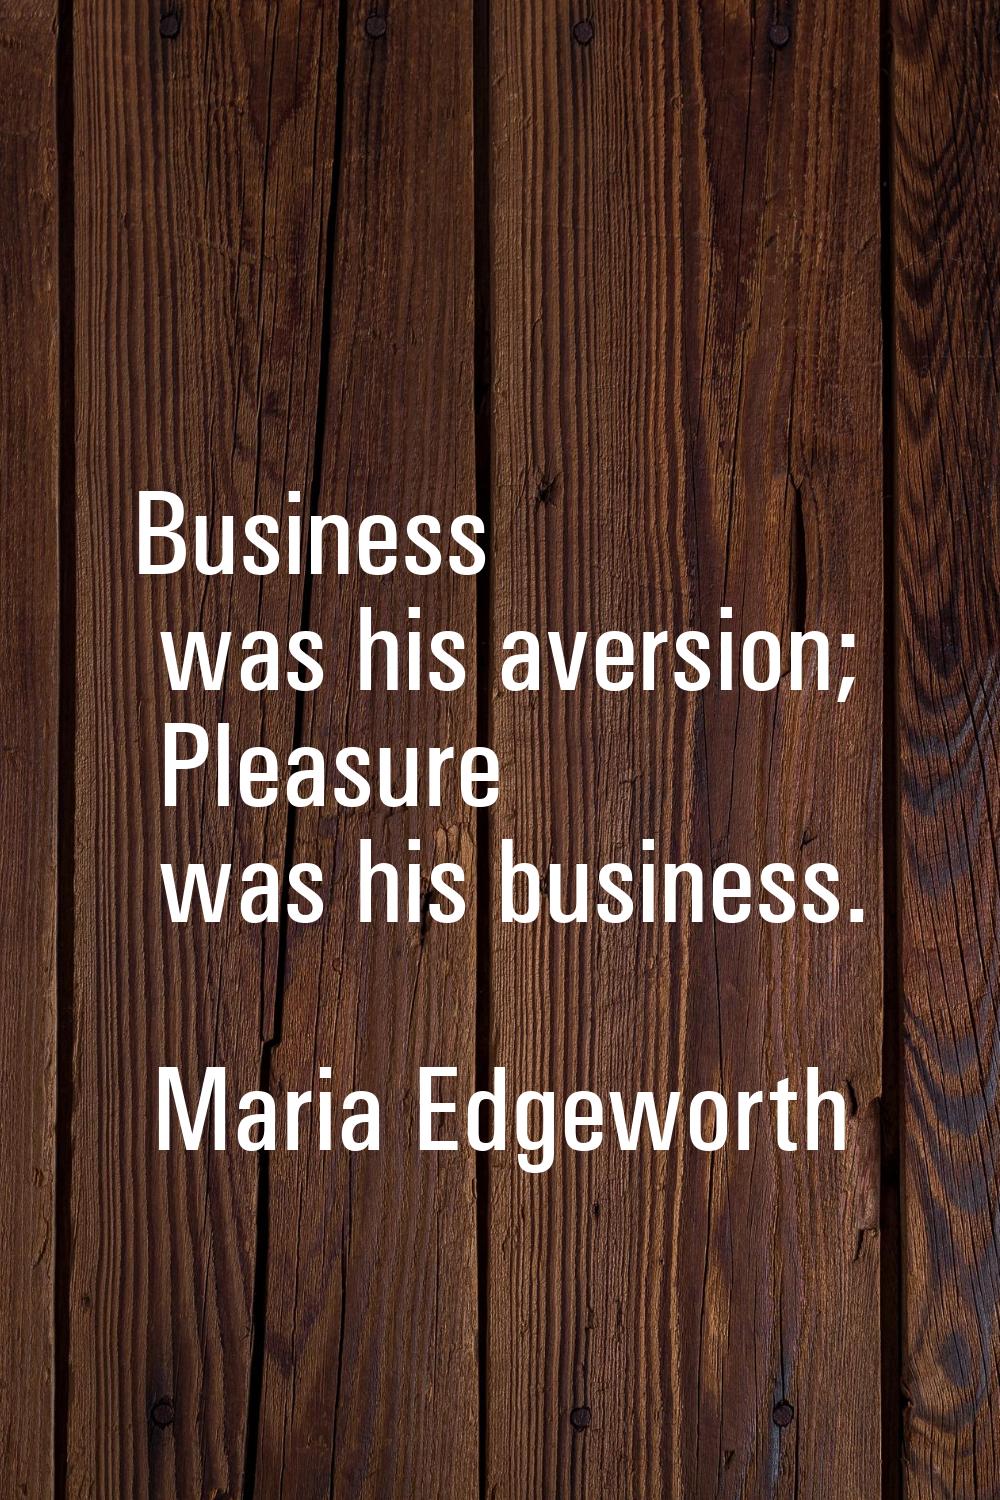 Business was his aversion; Pleasure was his business.